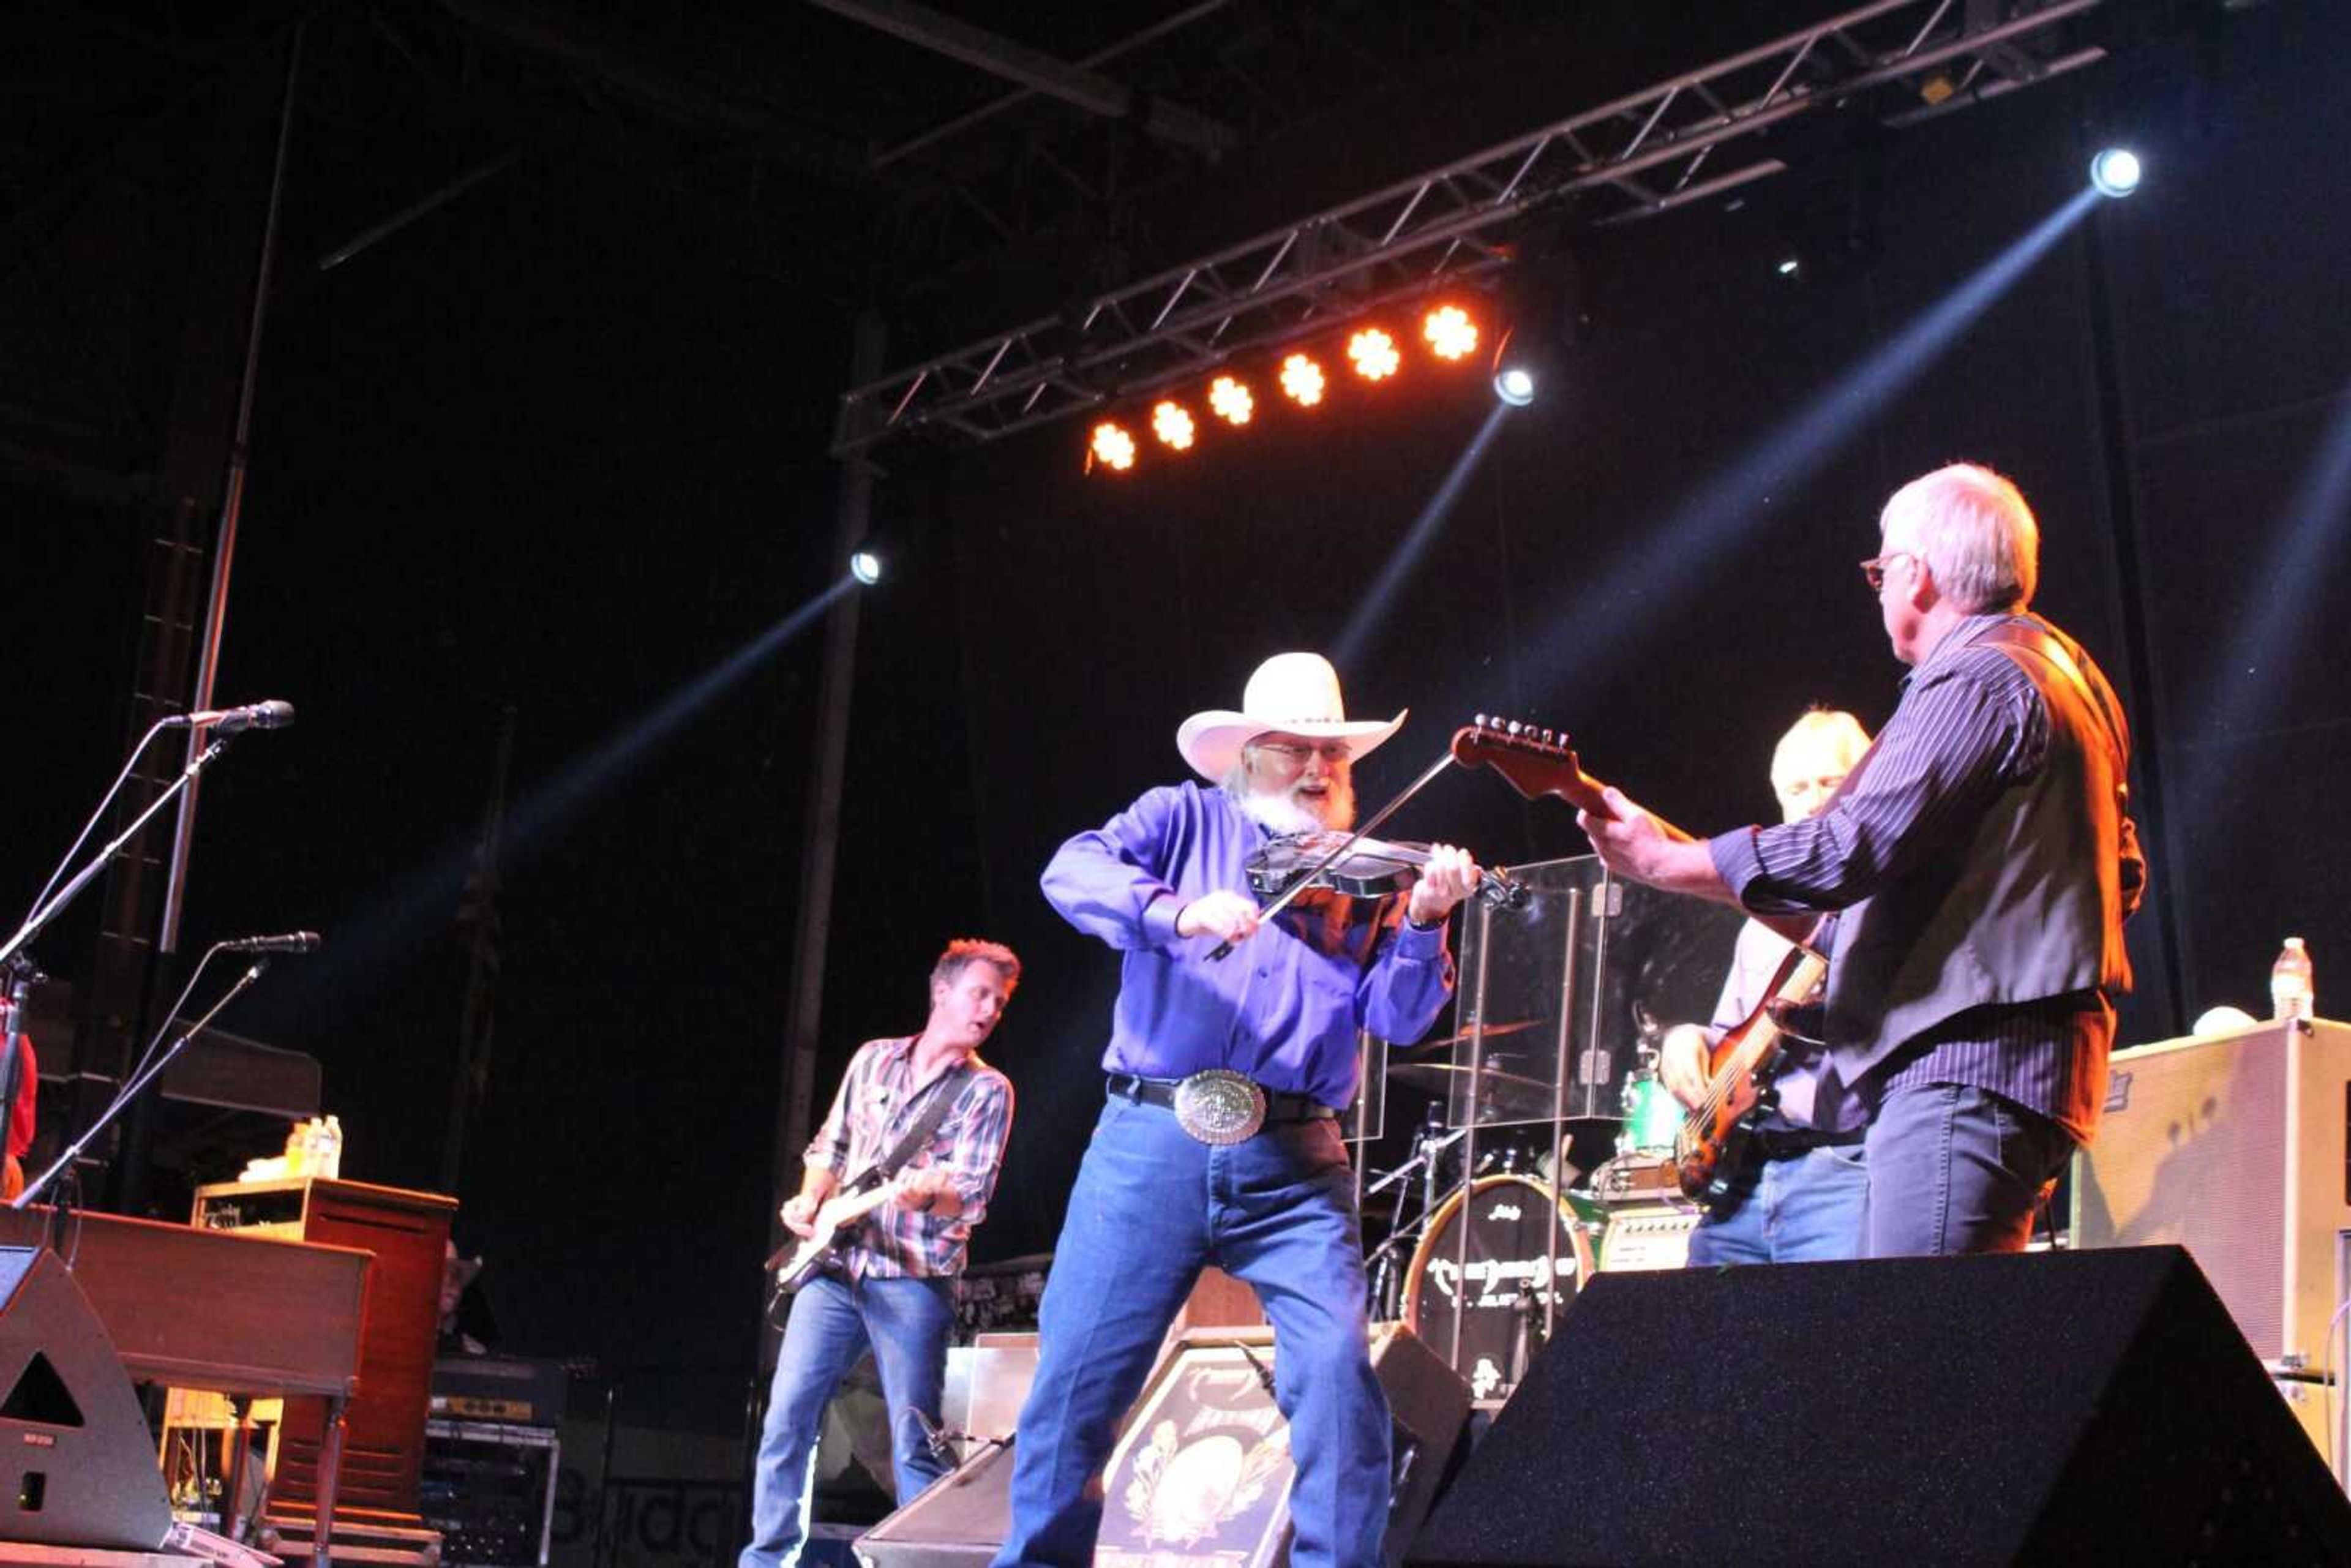 The Charlie Daniels Band plays away during their concert at the SEMO district fair grandstand.